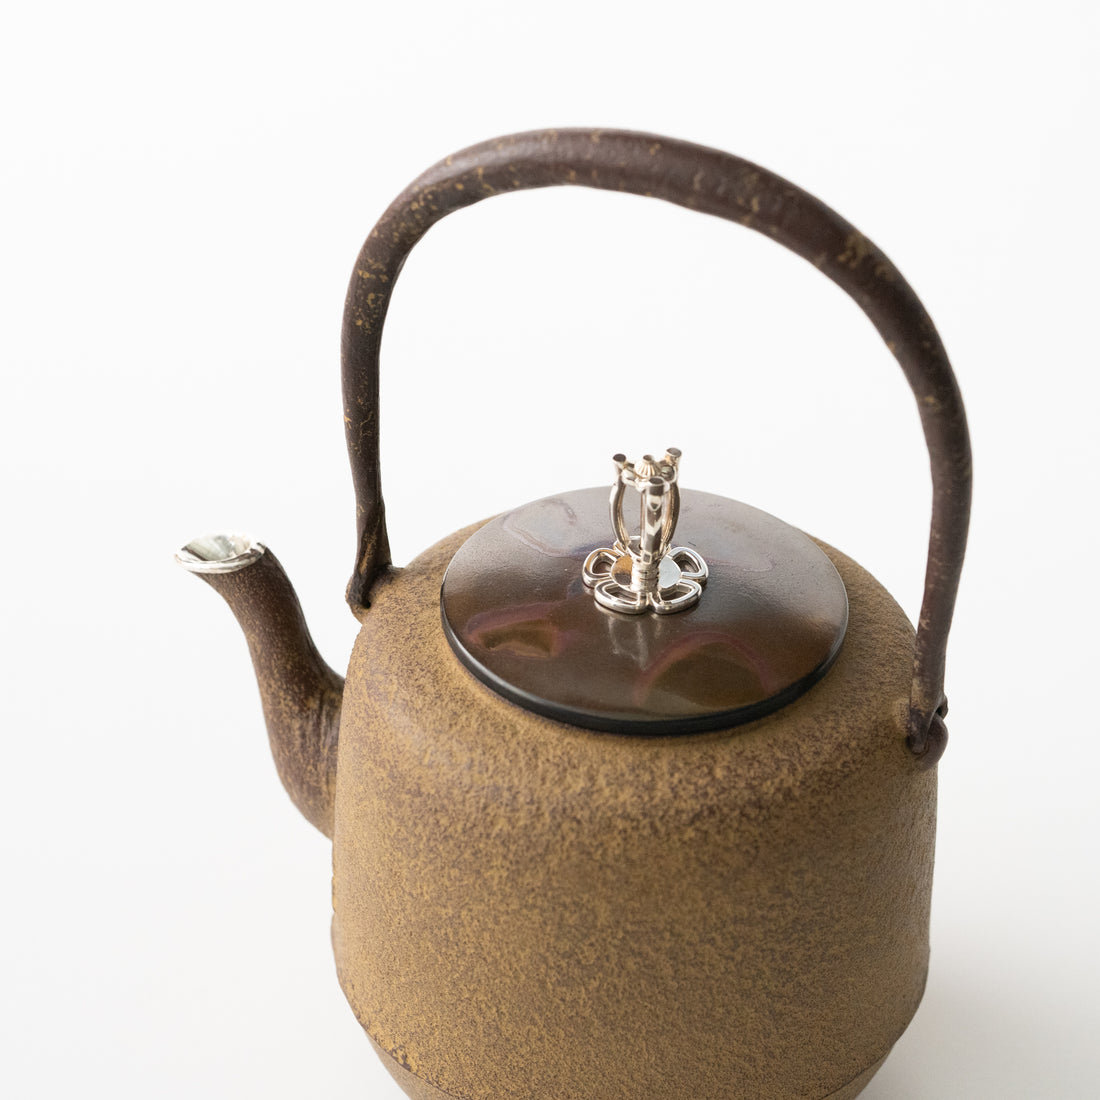 Iron Kettle / Small Natsume